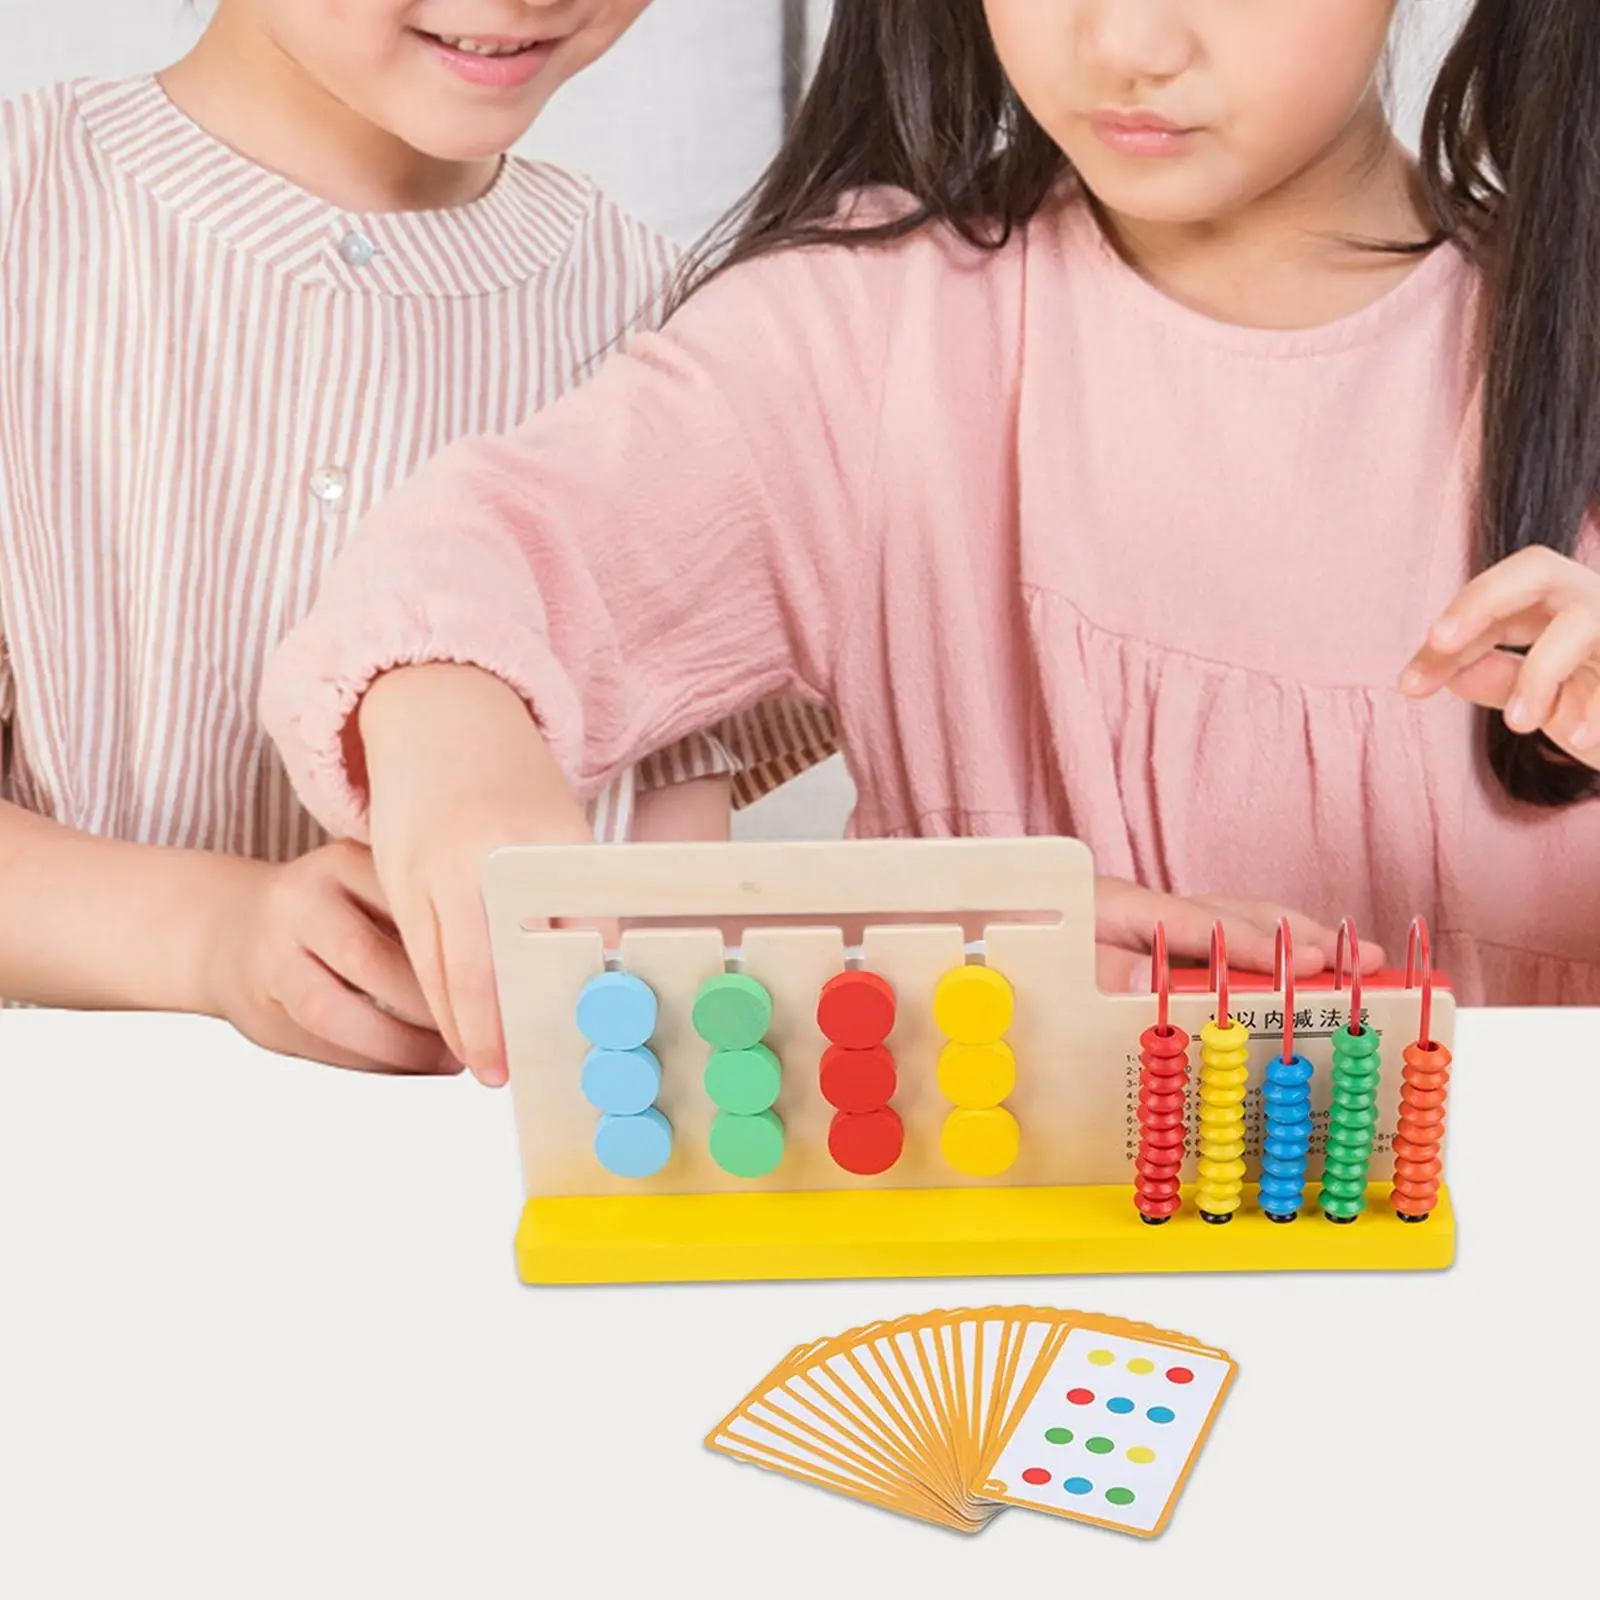 Sliding Puzzle Colorful Bead Frame Abacus Brain Teasers Memory Game Counting Numbers Wooden Toys Gifts Preschool Ages 3+ Toddler